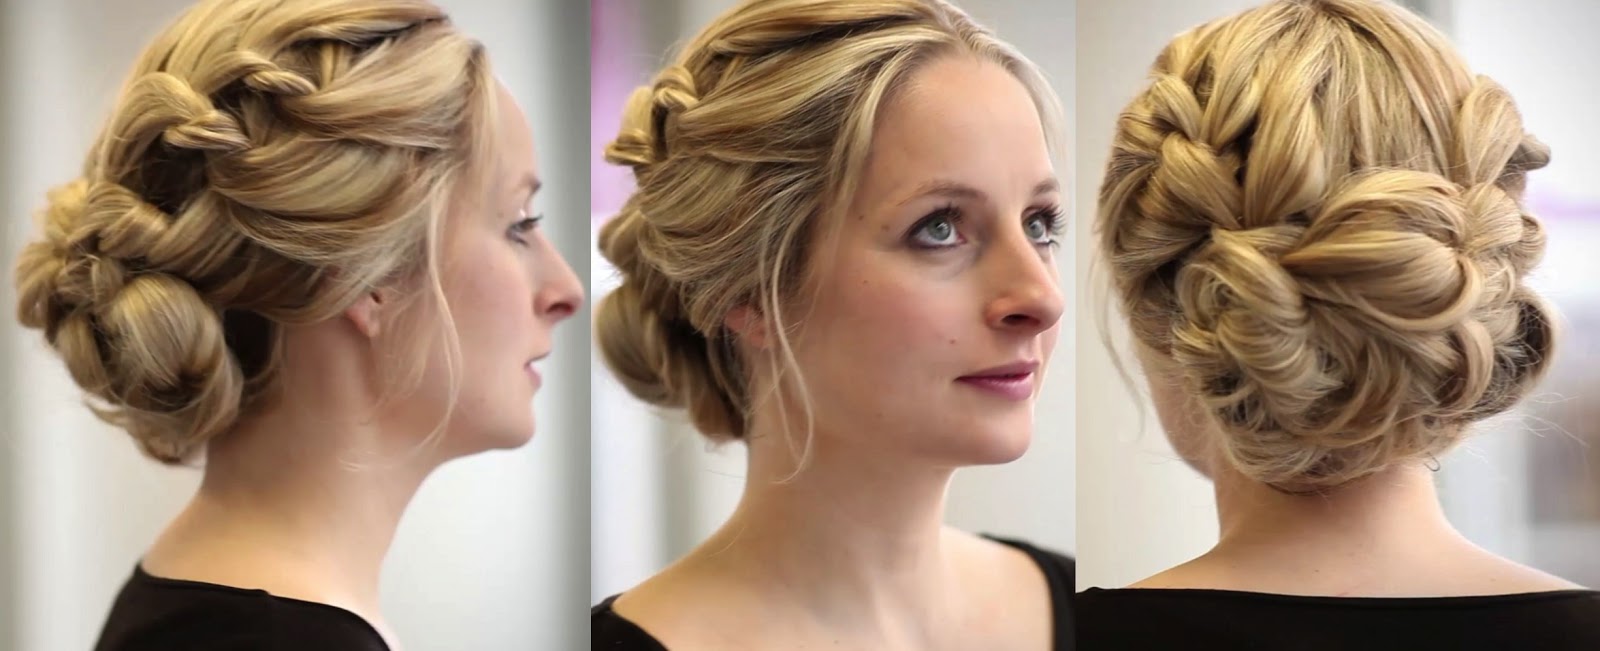 Whimsical Bridesmaid Hairstyles with ghd